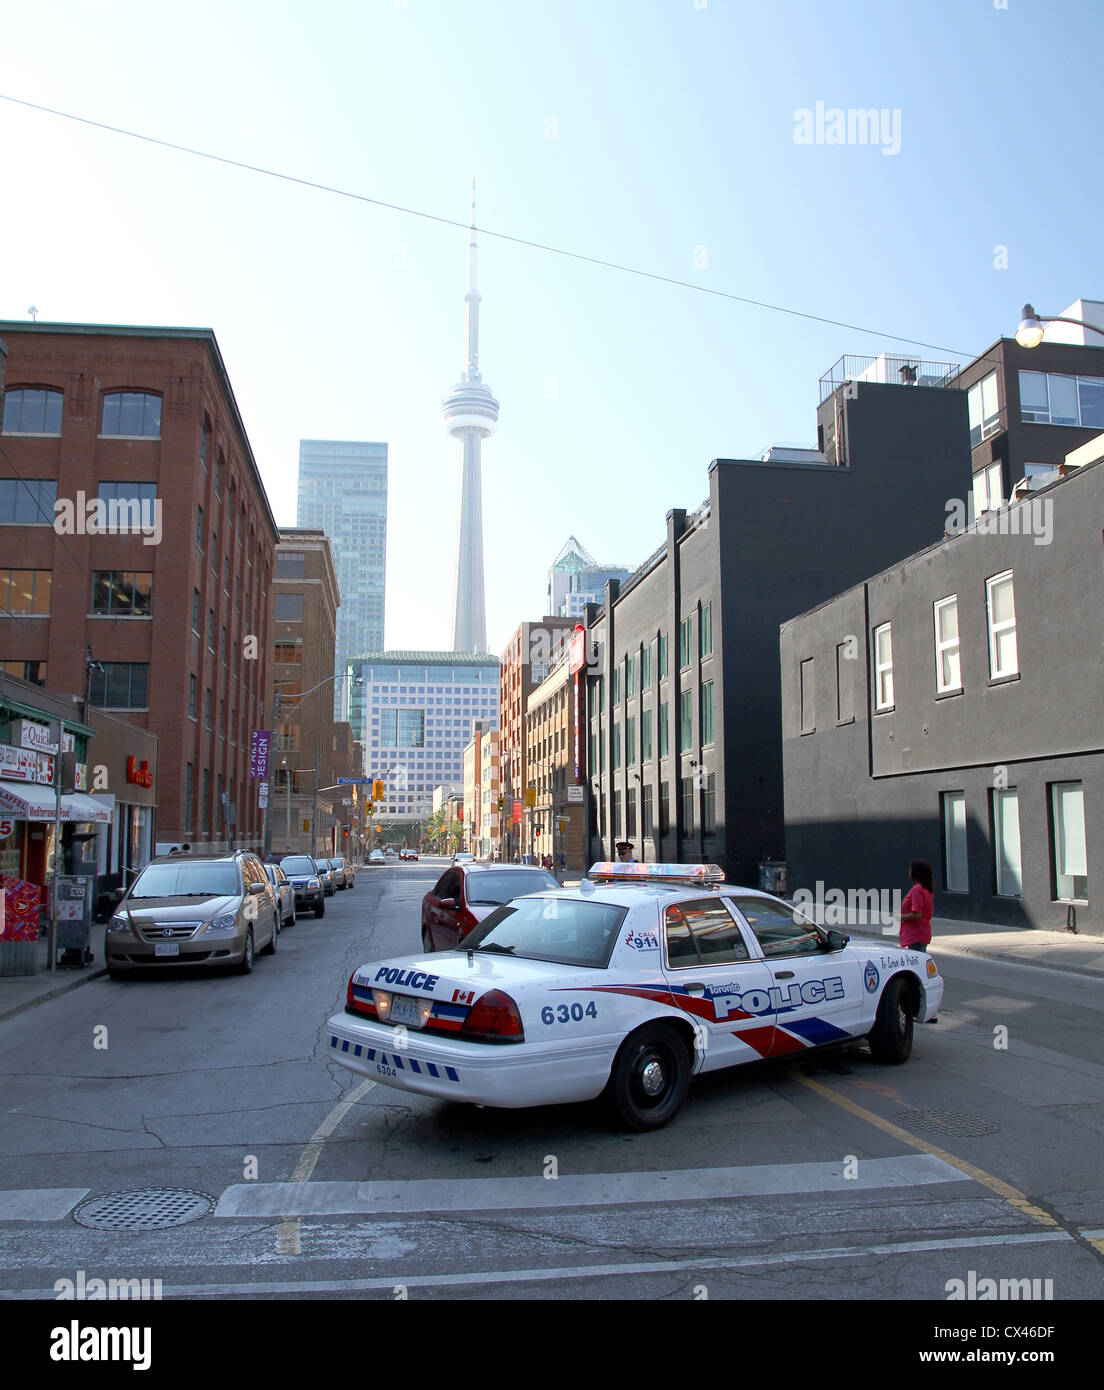 A Toronto Police car and agent in a Toronto Downtown street Stock Photo